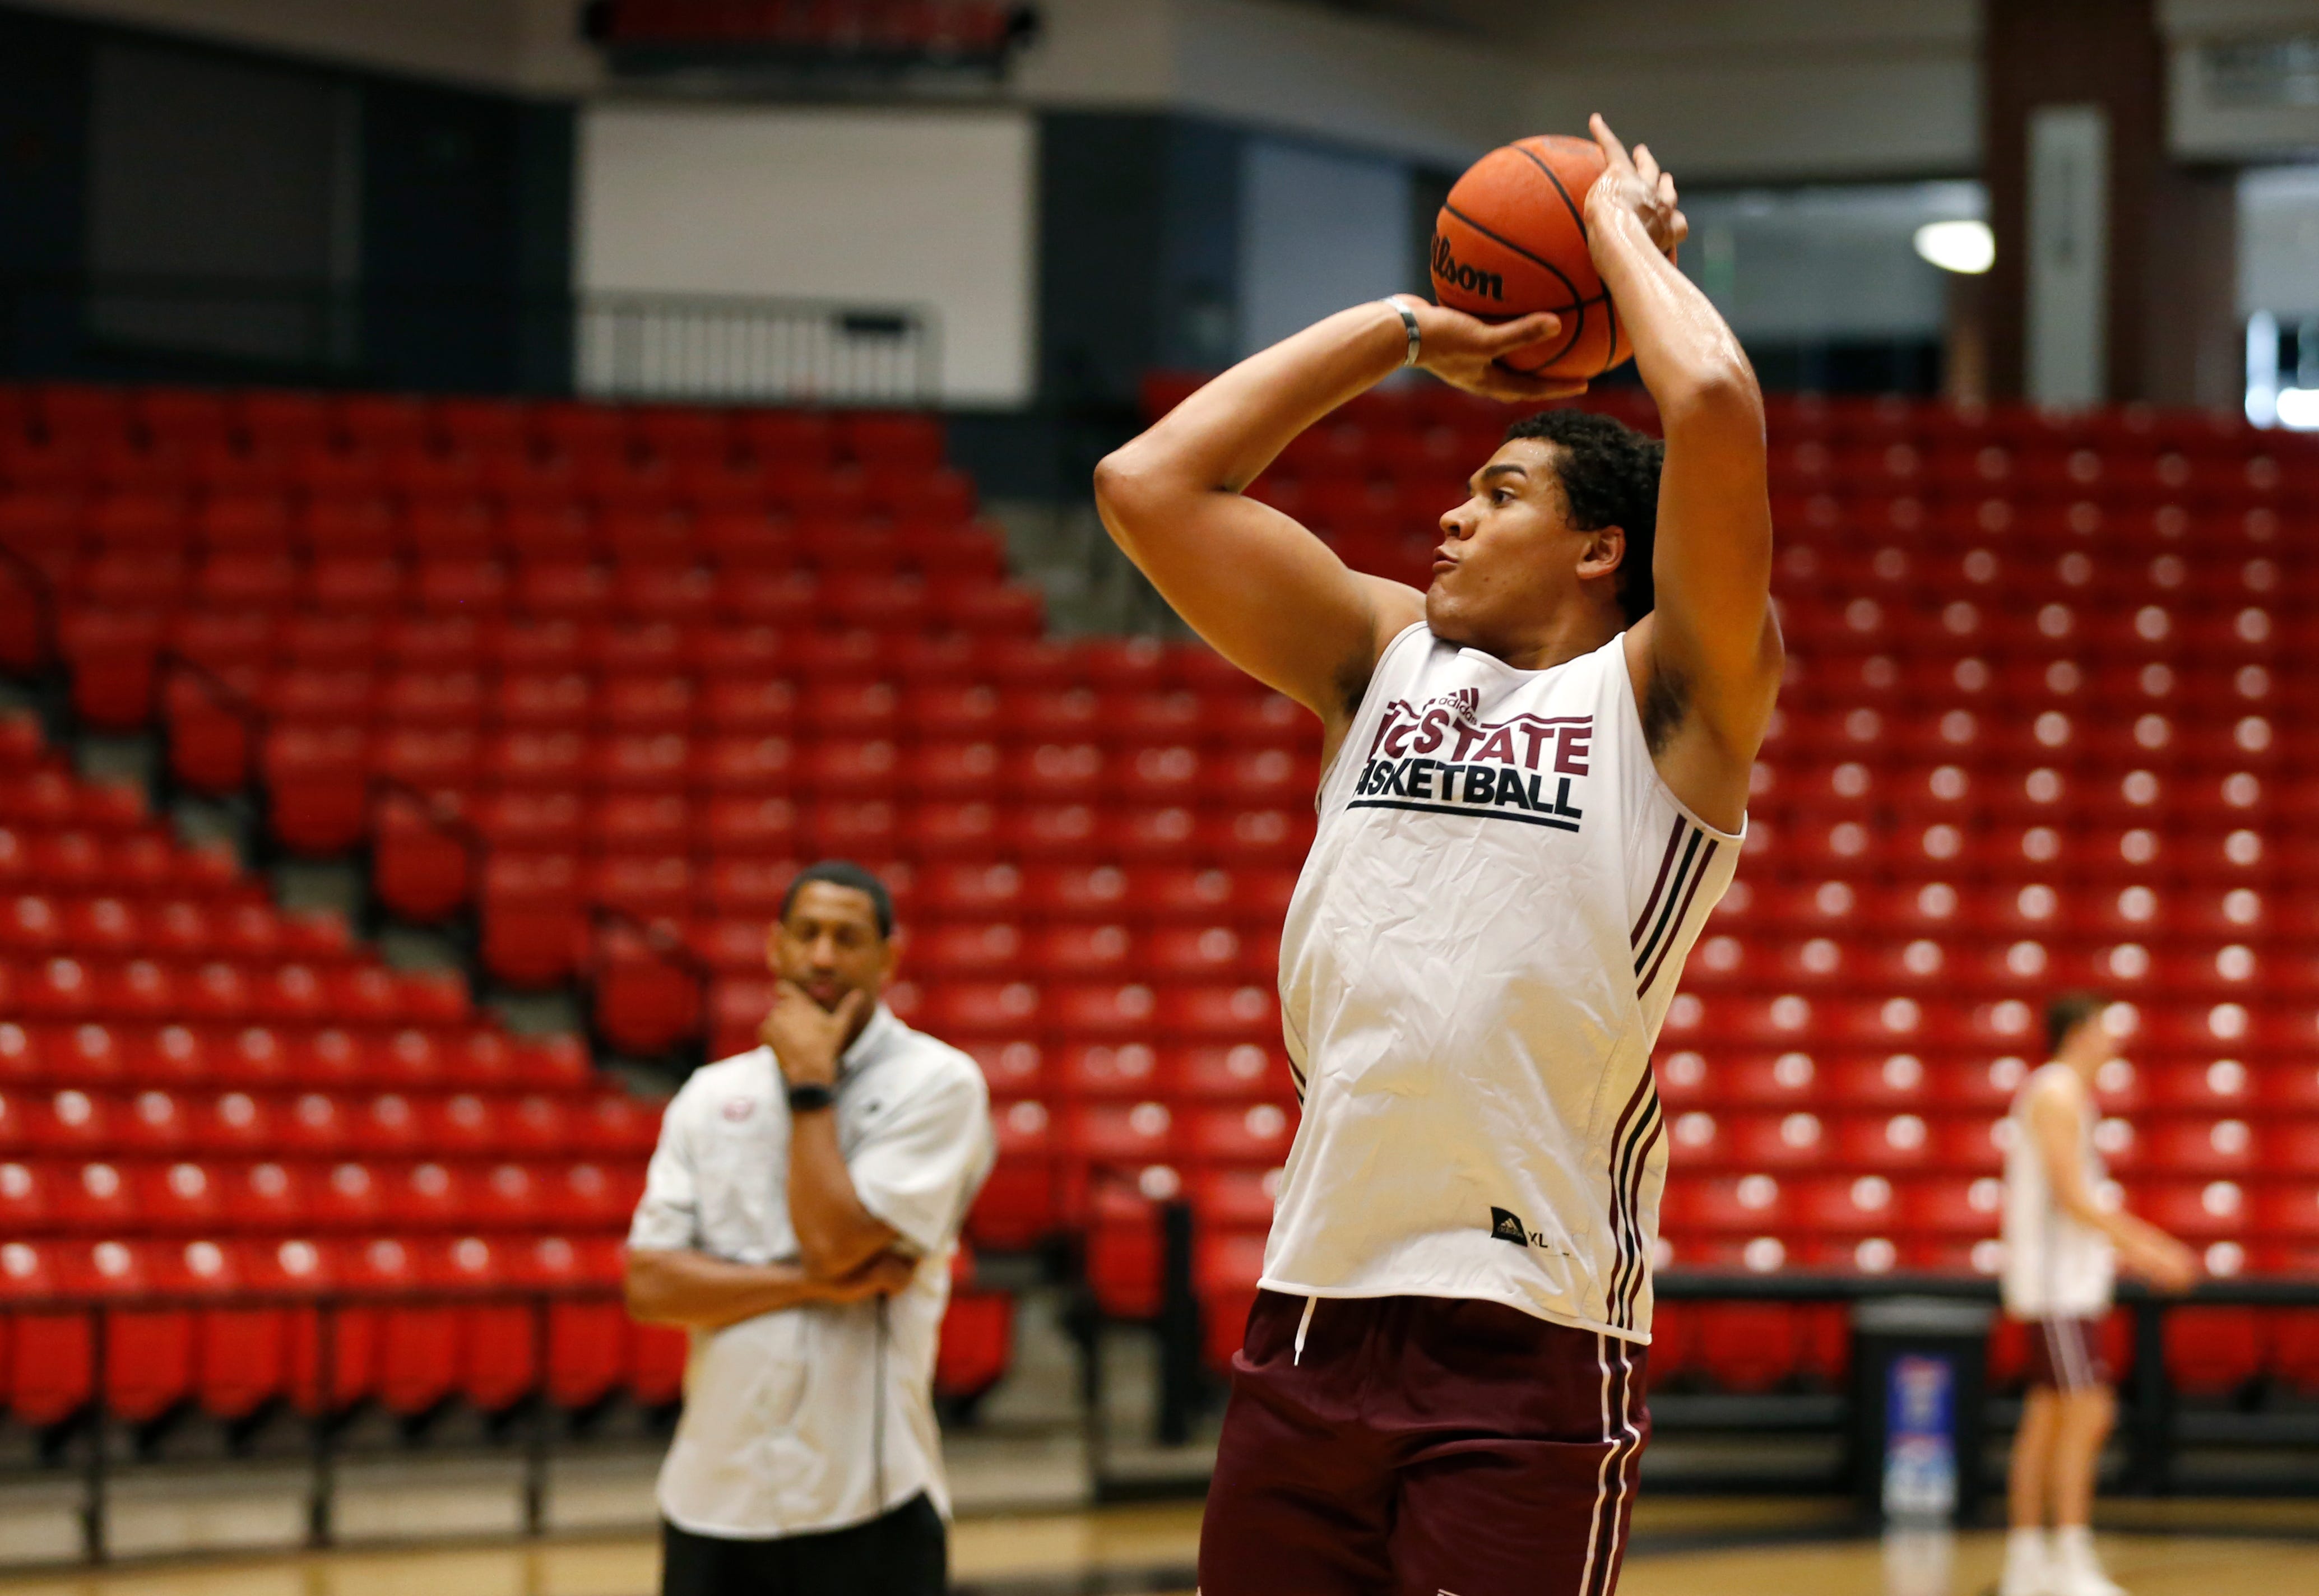 Missouri State basketball player Gaige Prim shoots a basket during practice on Wednesday, July 17, 2019.